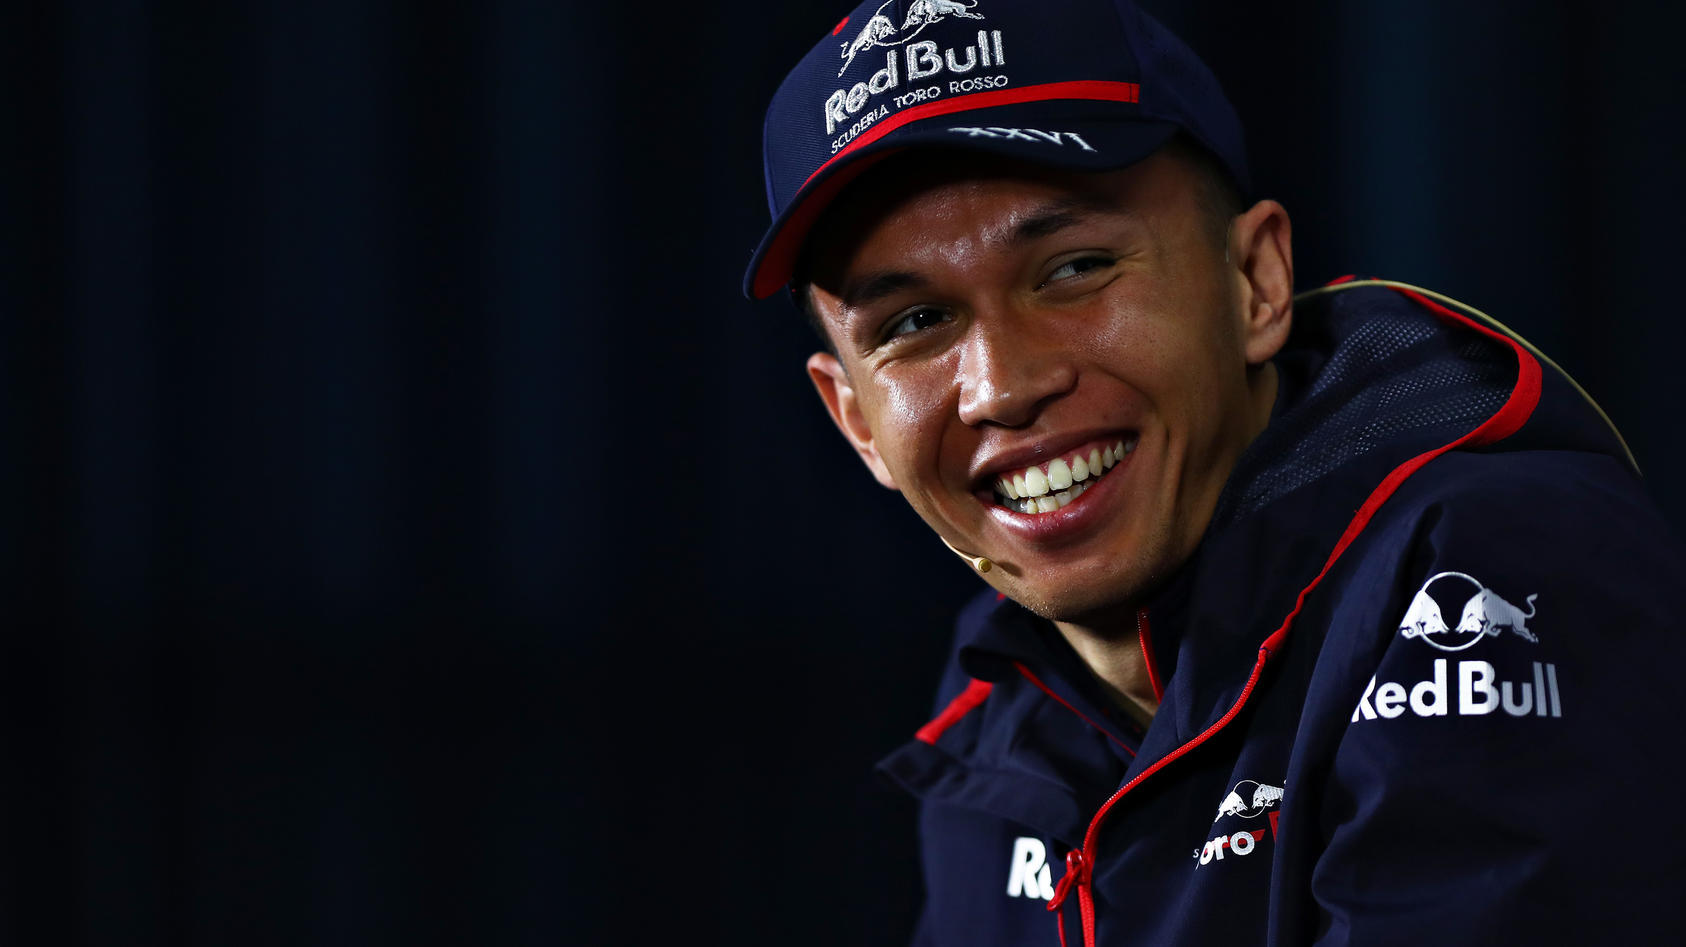 SHANGHAI, CHINA - APRIL 11: Alexander Albon of Thailand and Scuderia Toro Rosso looks on in the Drivers Press Conference during previews ahead of the F1 Grand Prix of China at Shanghai International Circuit on April 11, 2019 in Shanghai, China. (Phot